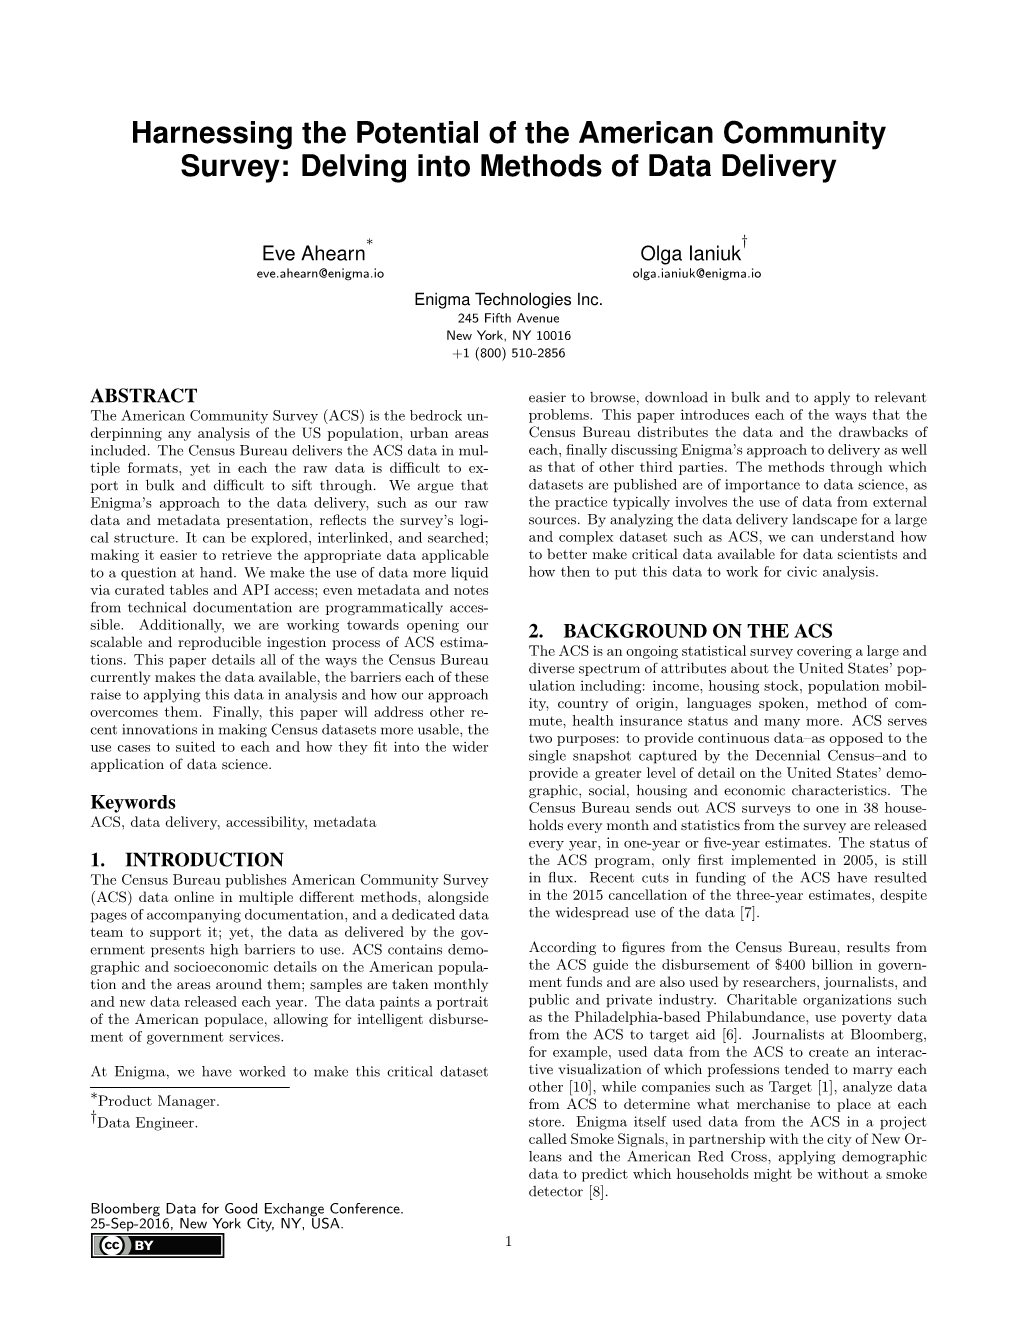 Delving Into Methods of Data Delivery